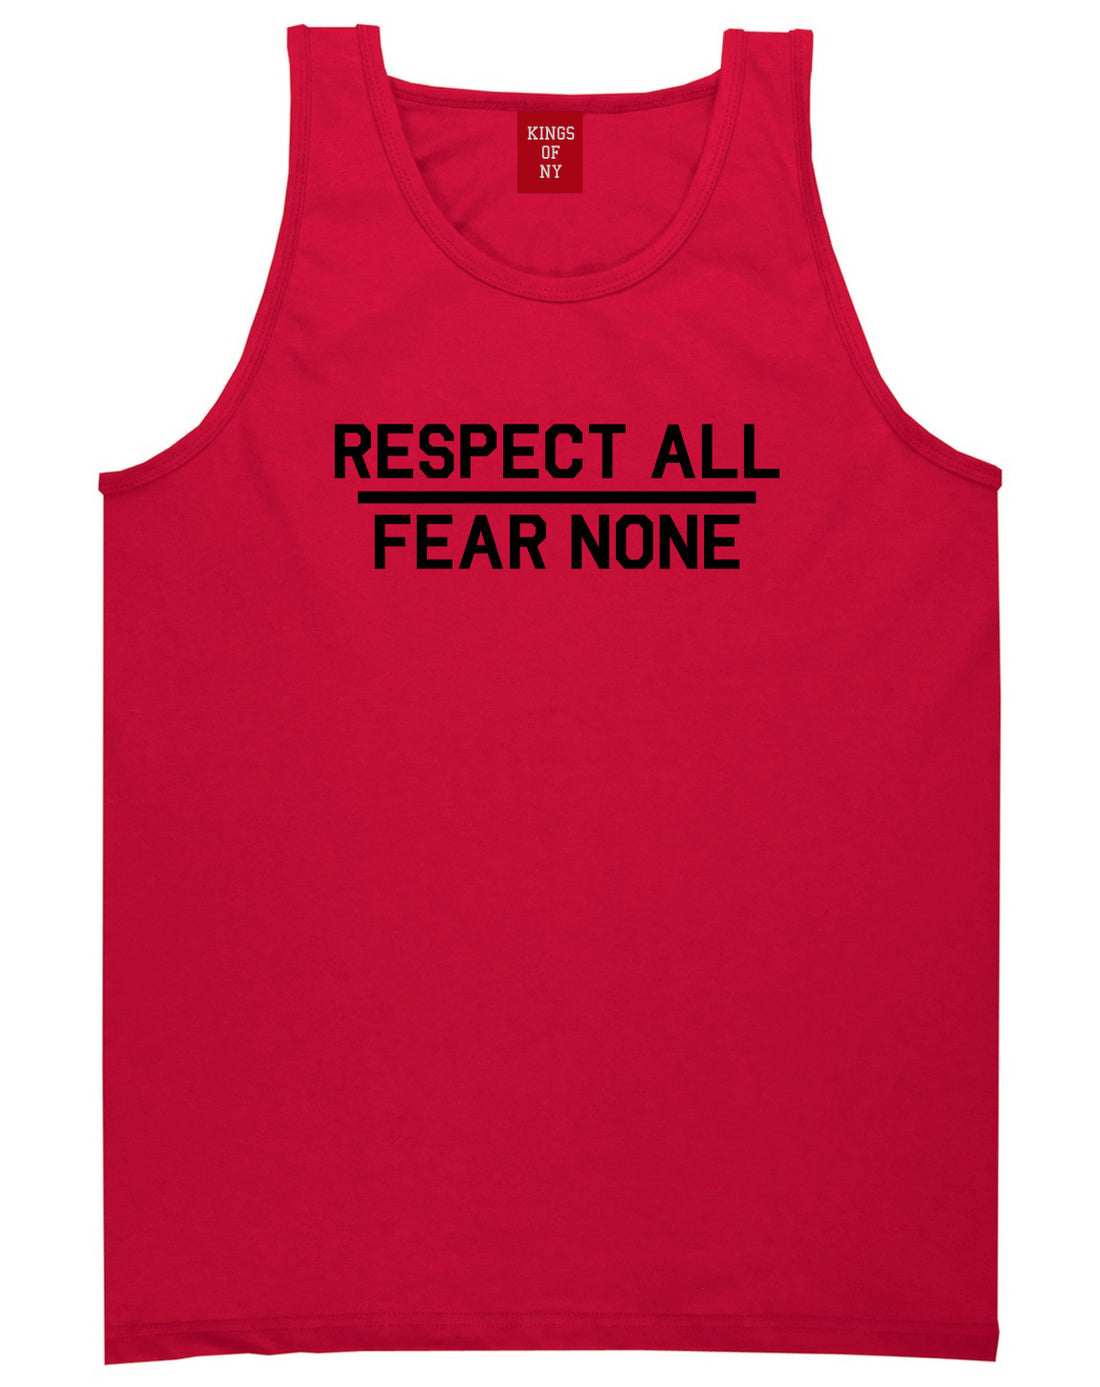 Respect All Fear None Mens Tank Top Shirt Red by Kings Of NY